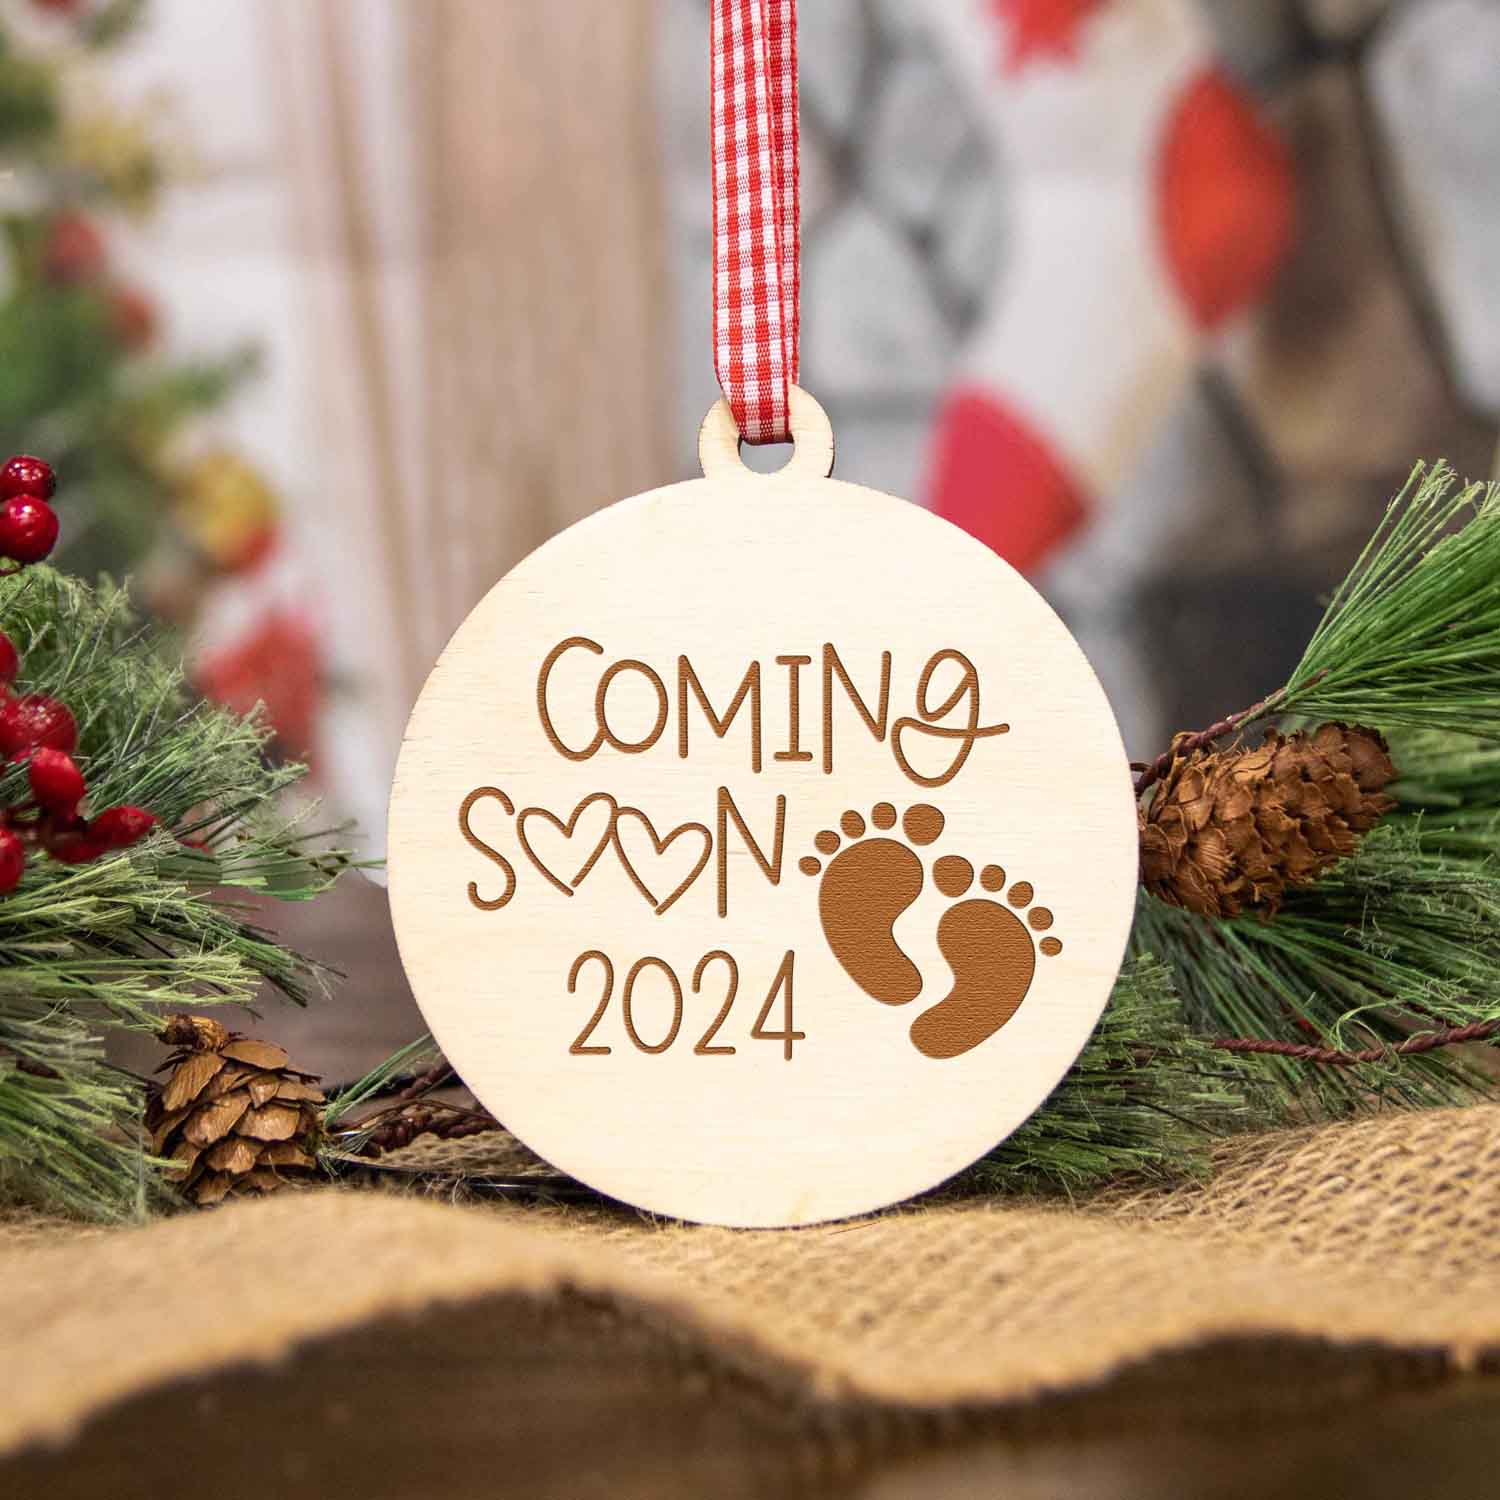 Pregnancy Announcement Wood Christmas Ornament - Coming Soon 2023